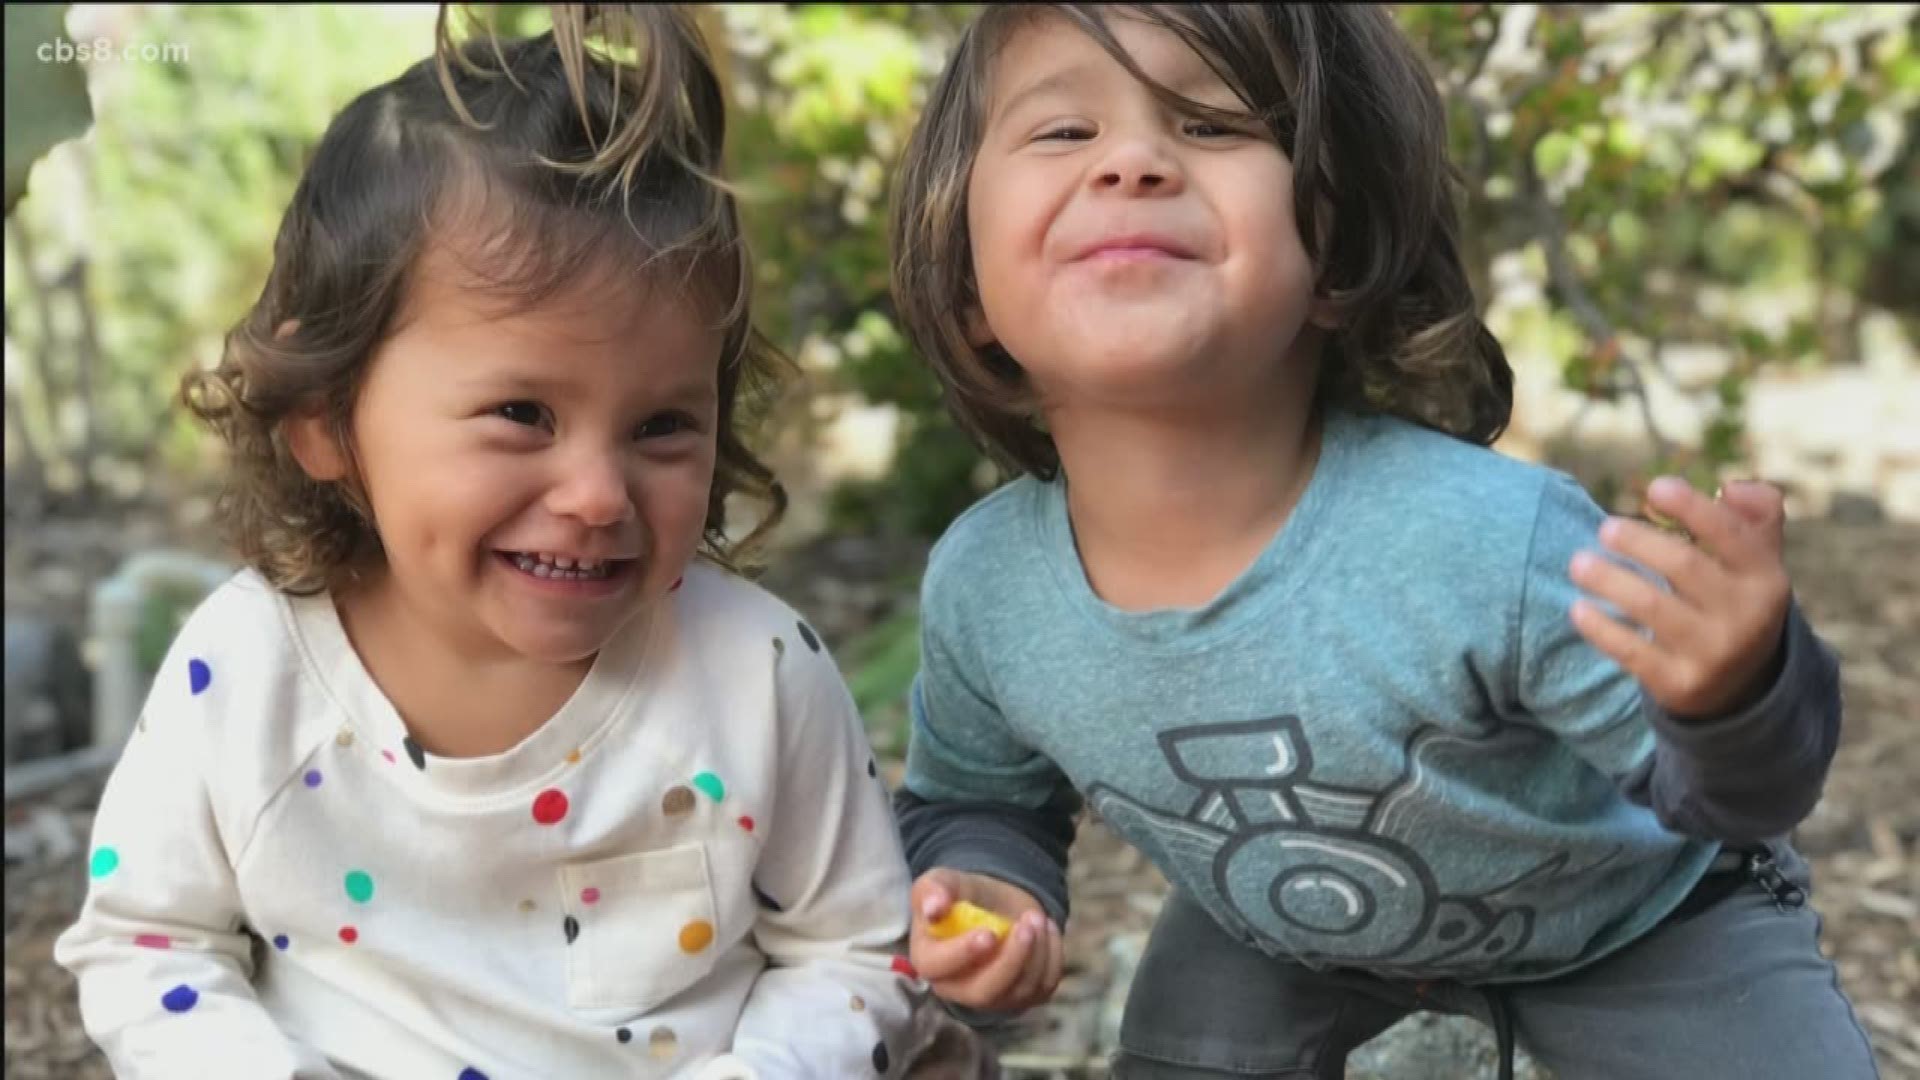 This Adopt 8 success story comes from an active family of four that spends a lot of time at the beach, riding scooters and bikes, and exploring San Diego.